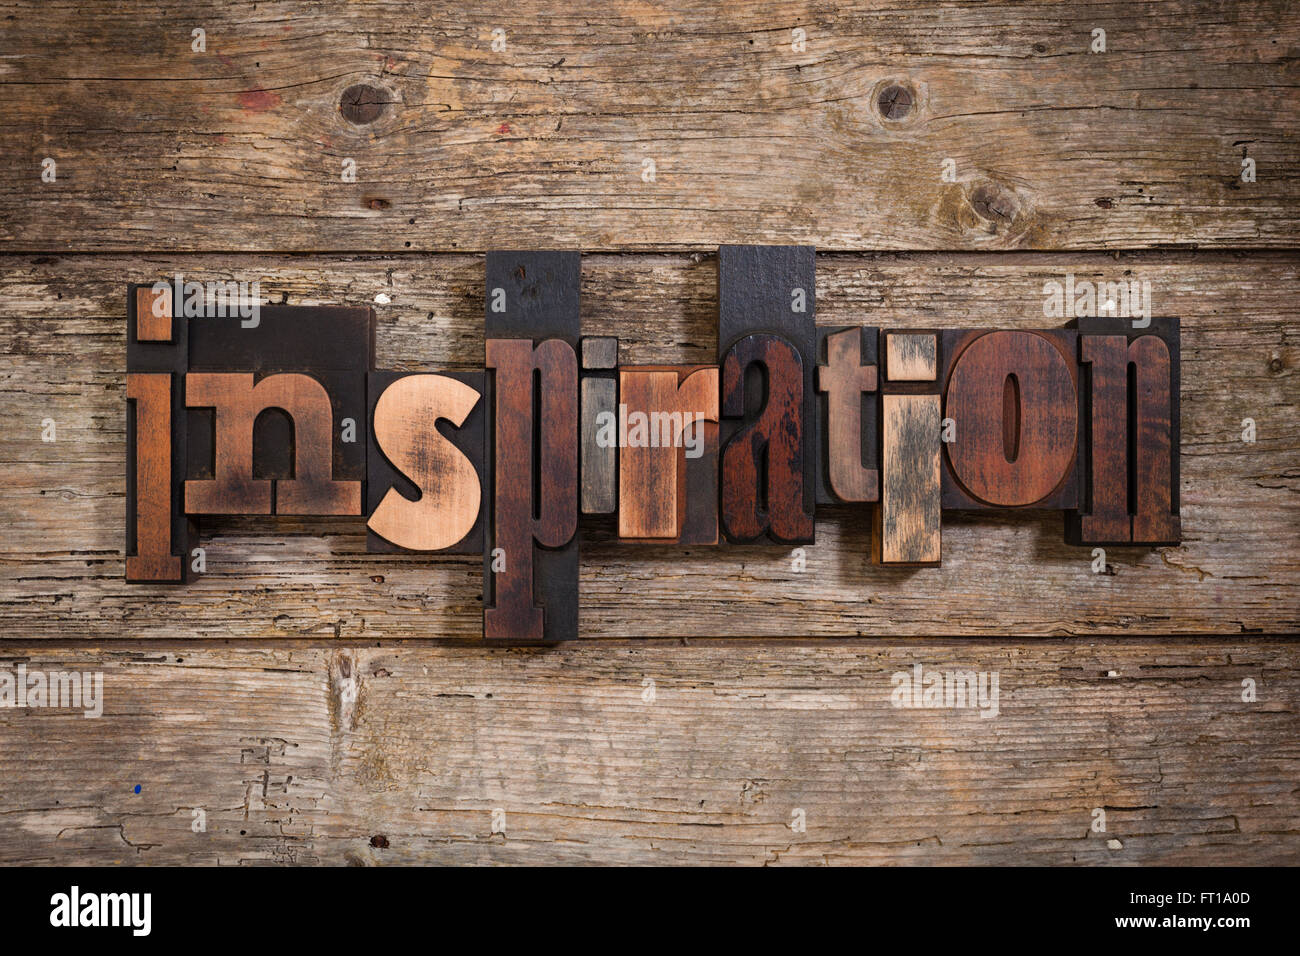 Inspiration, word written with vintage letterpress printing blocks on rustic wooden background Stock Photo